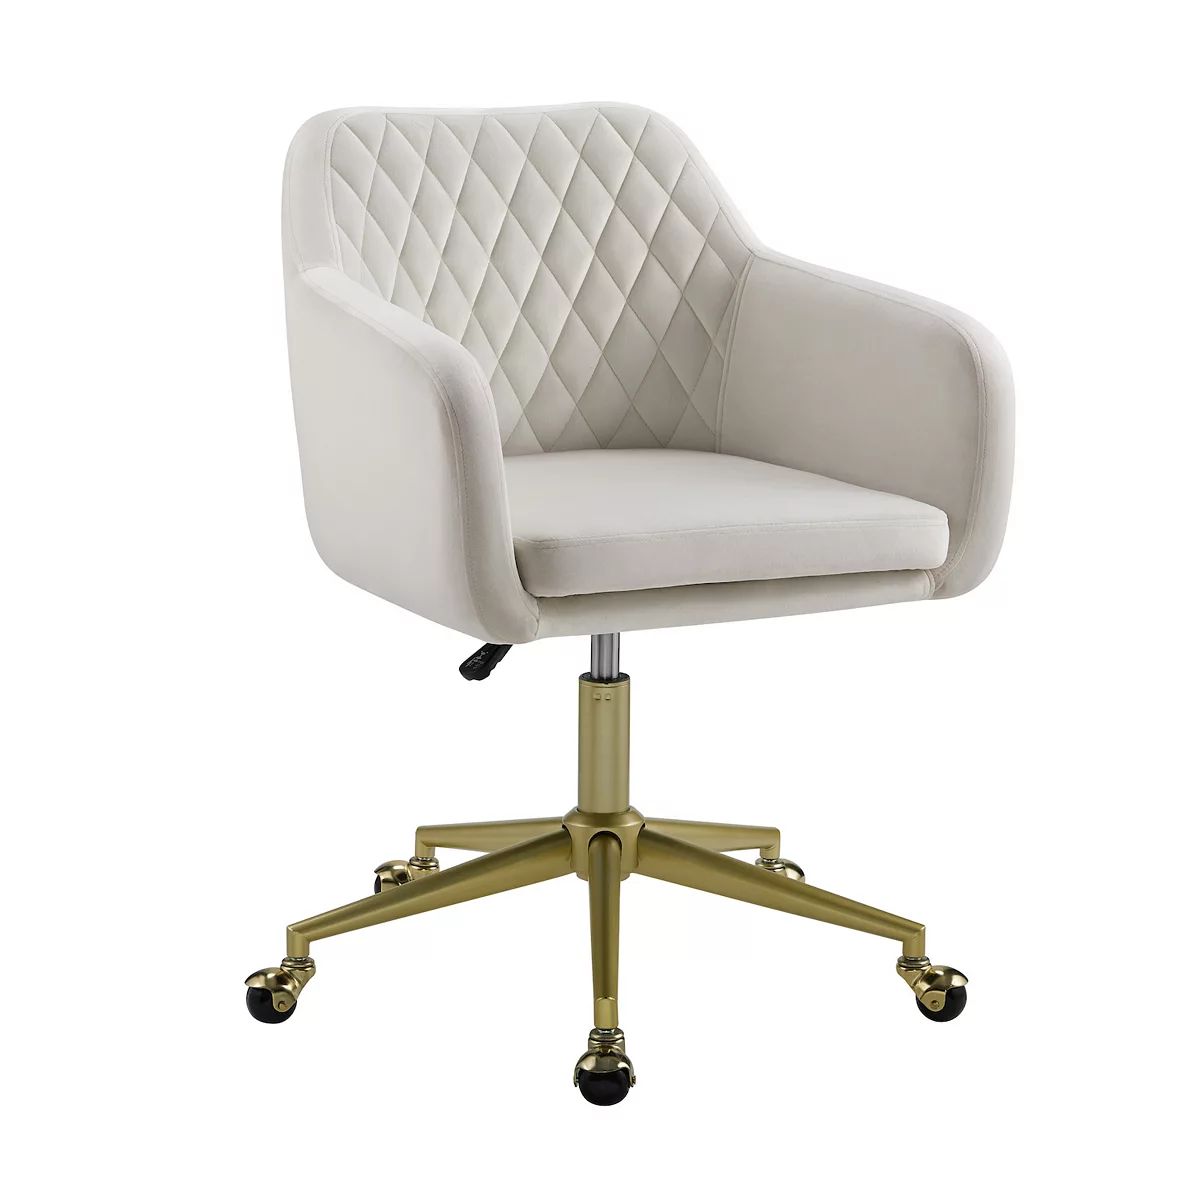 Linon Imogen Quilted Office Chair | Kohl's